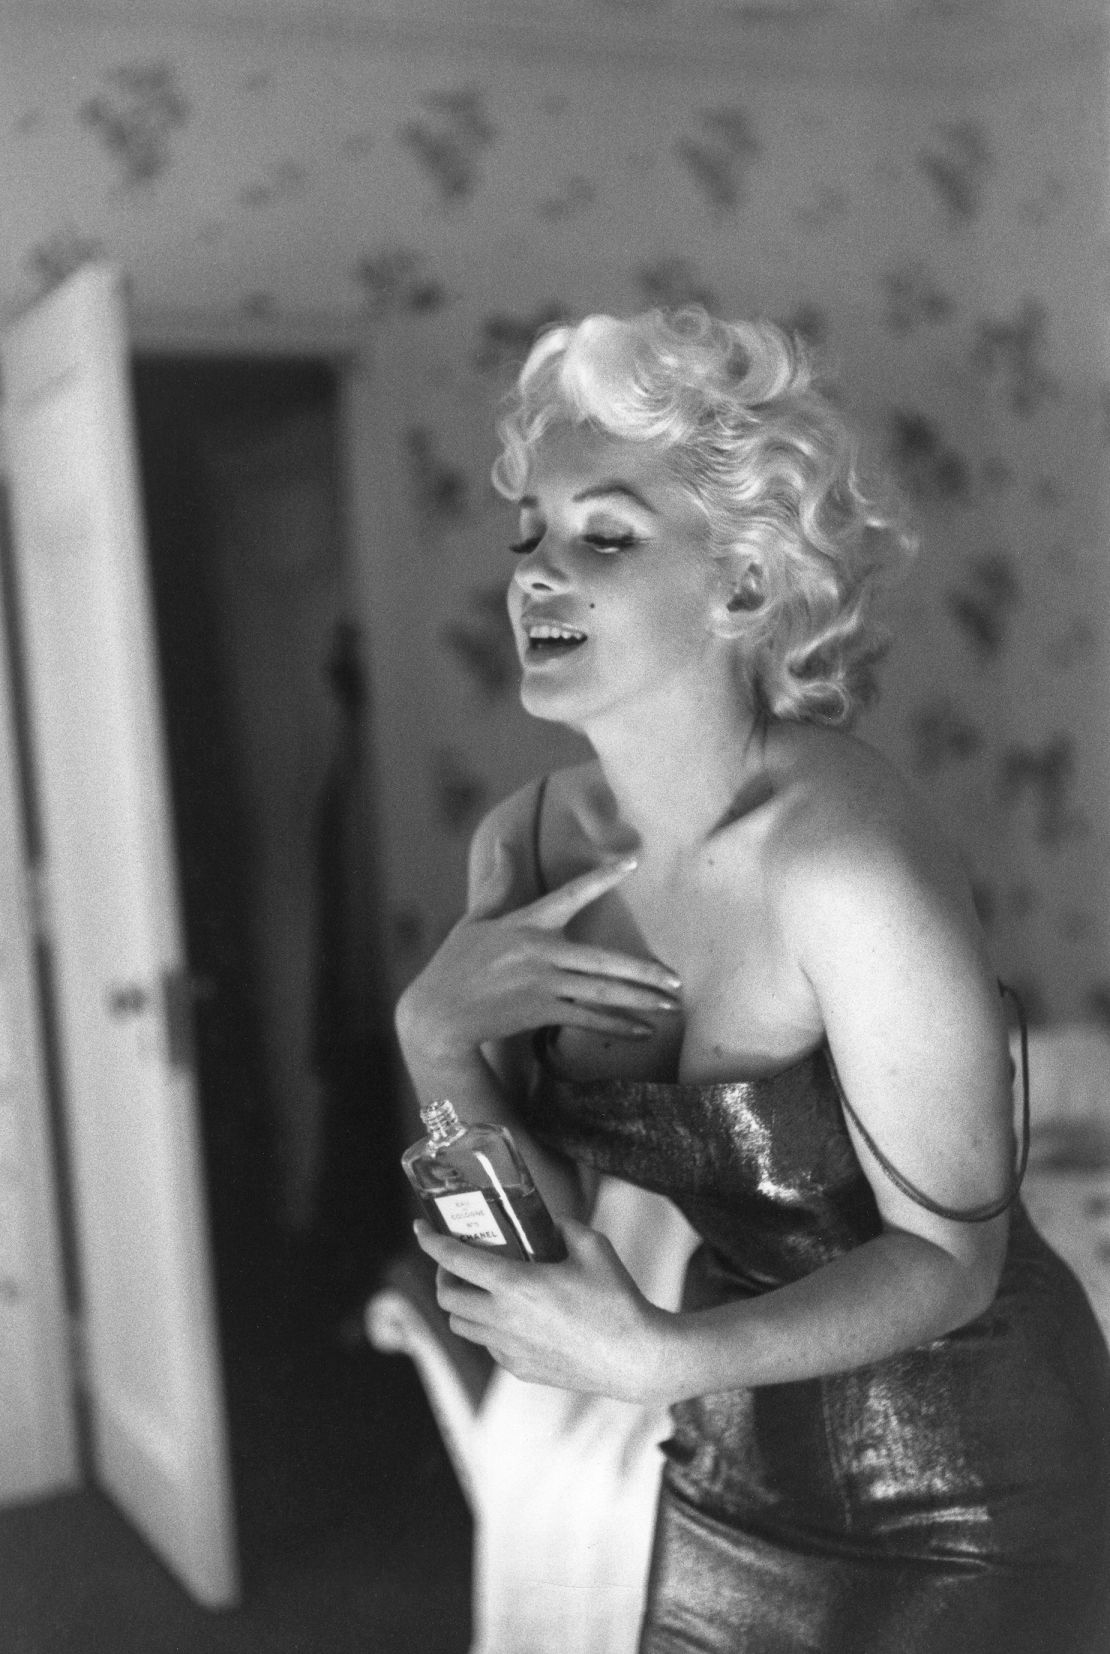 NEW YORK - MARCH 24: Actress Marilyn Monroe gets ready to go see the play "Cat On A Hot Tin Roof" playfully applying her make up and Chanel No. 5 Perfume on March 24, 1955 at the Ambassador Hotel in New York City, New York. (Photo by Ed Feingersh/Michael Ochs Archives/Getty Images)